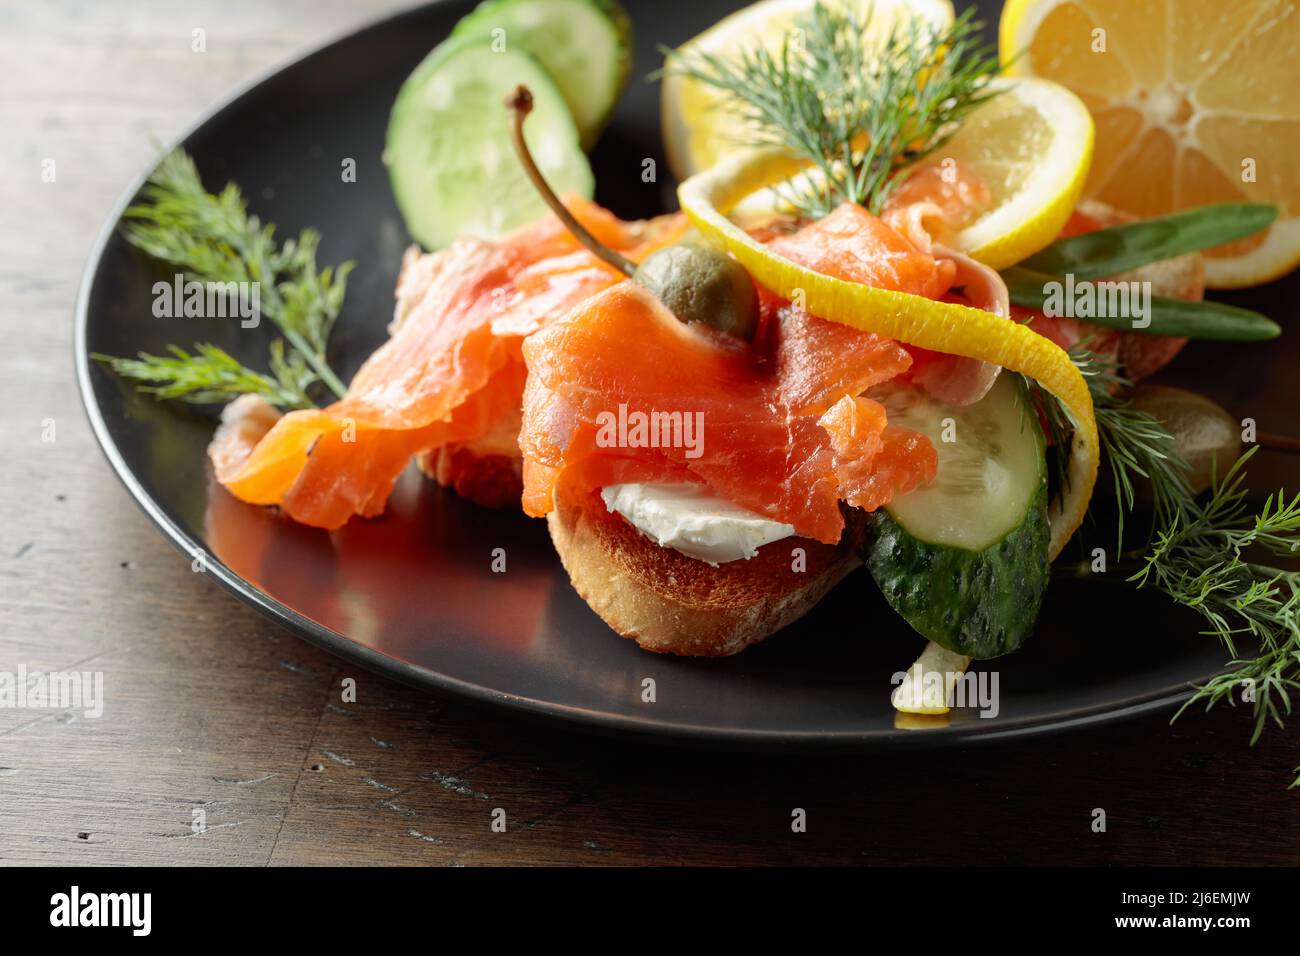 Sandwich with salmon, cream cheese, dill, cucumber, capers, green onion, and lemon. Stock Photo